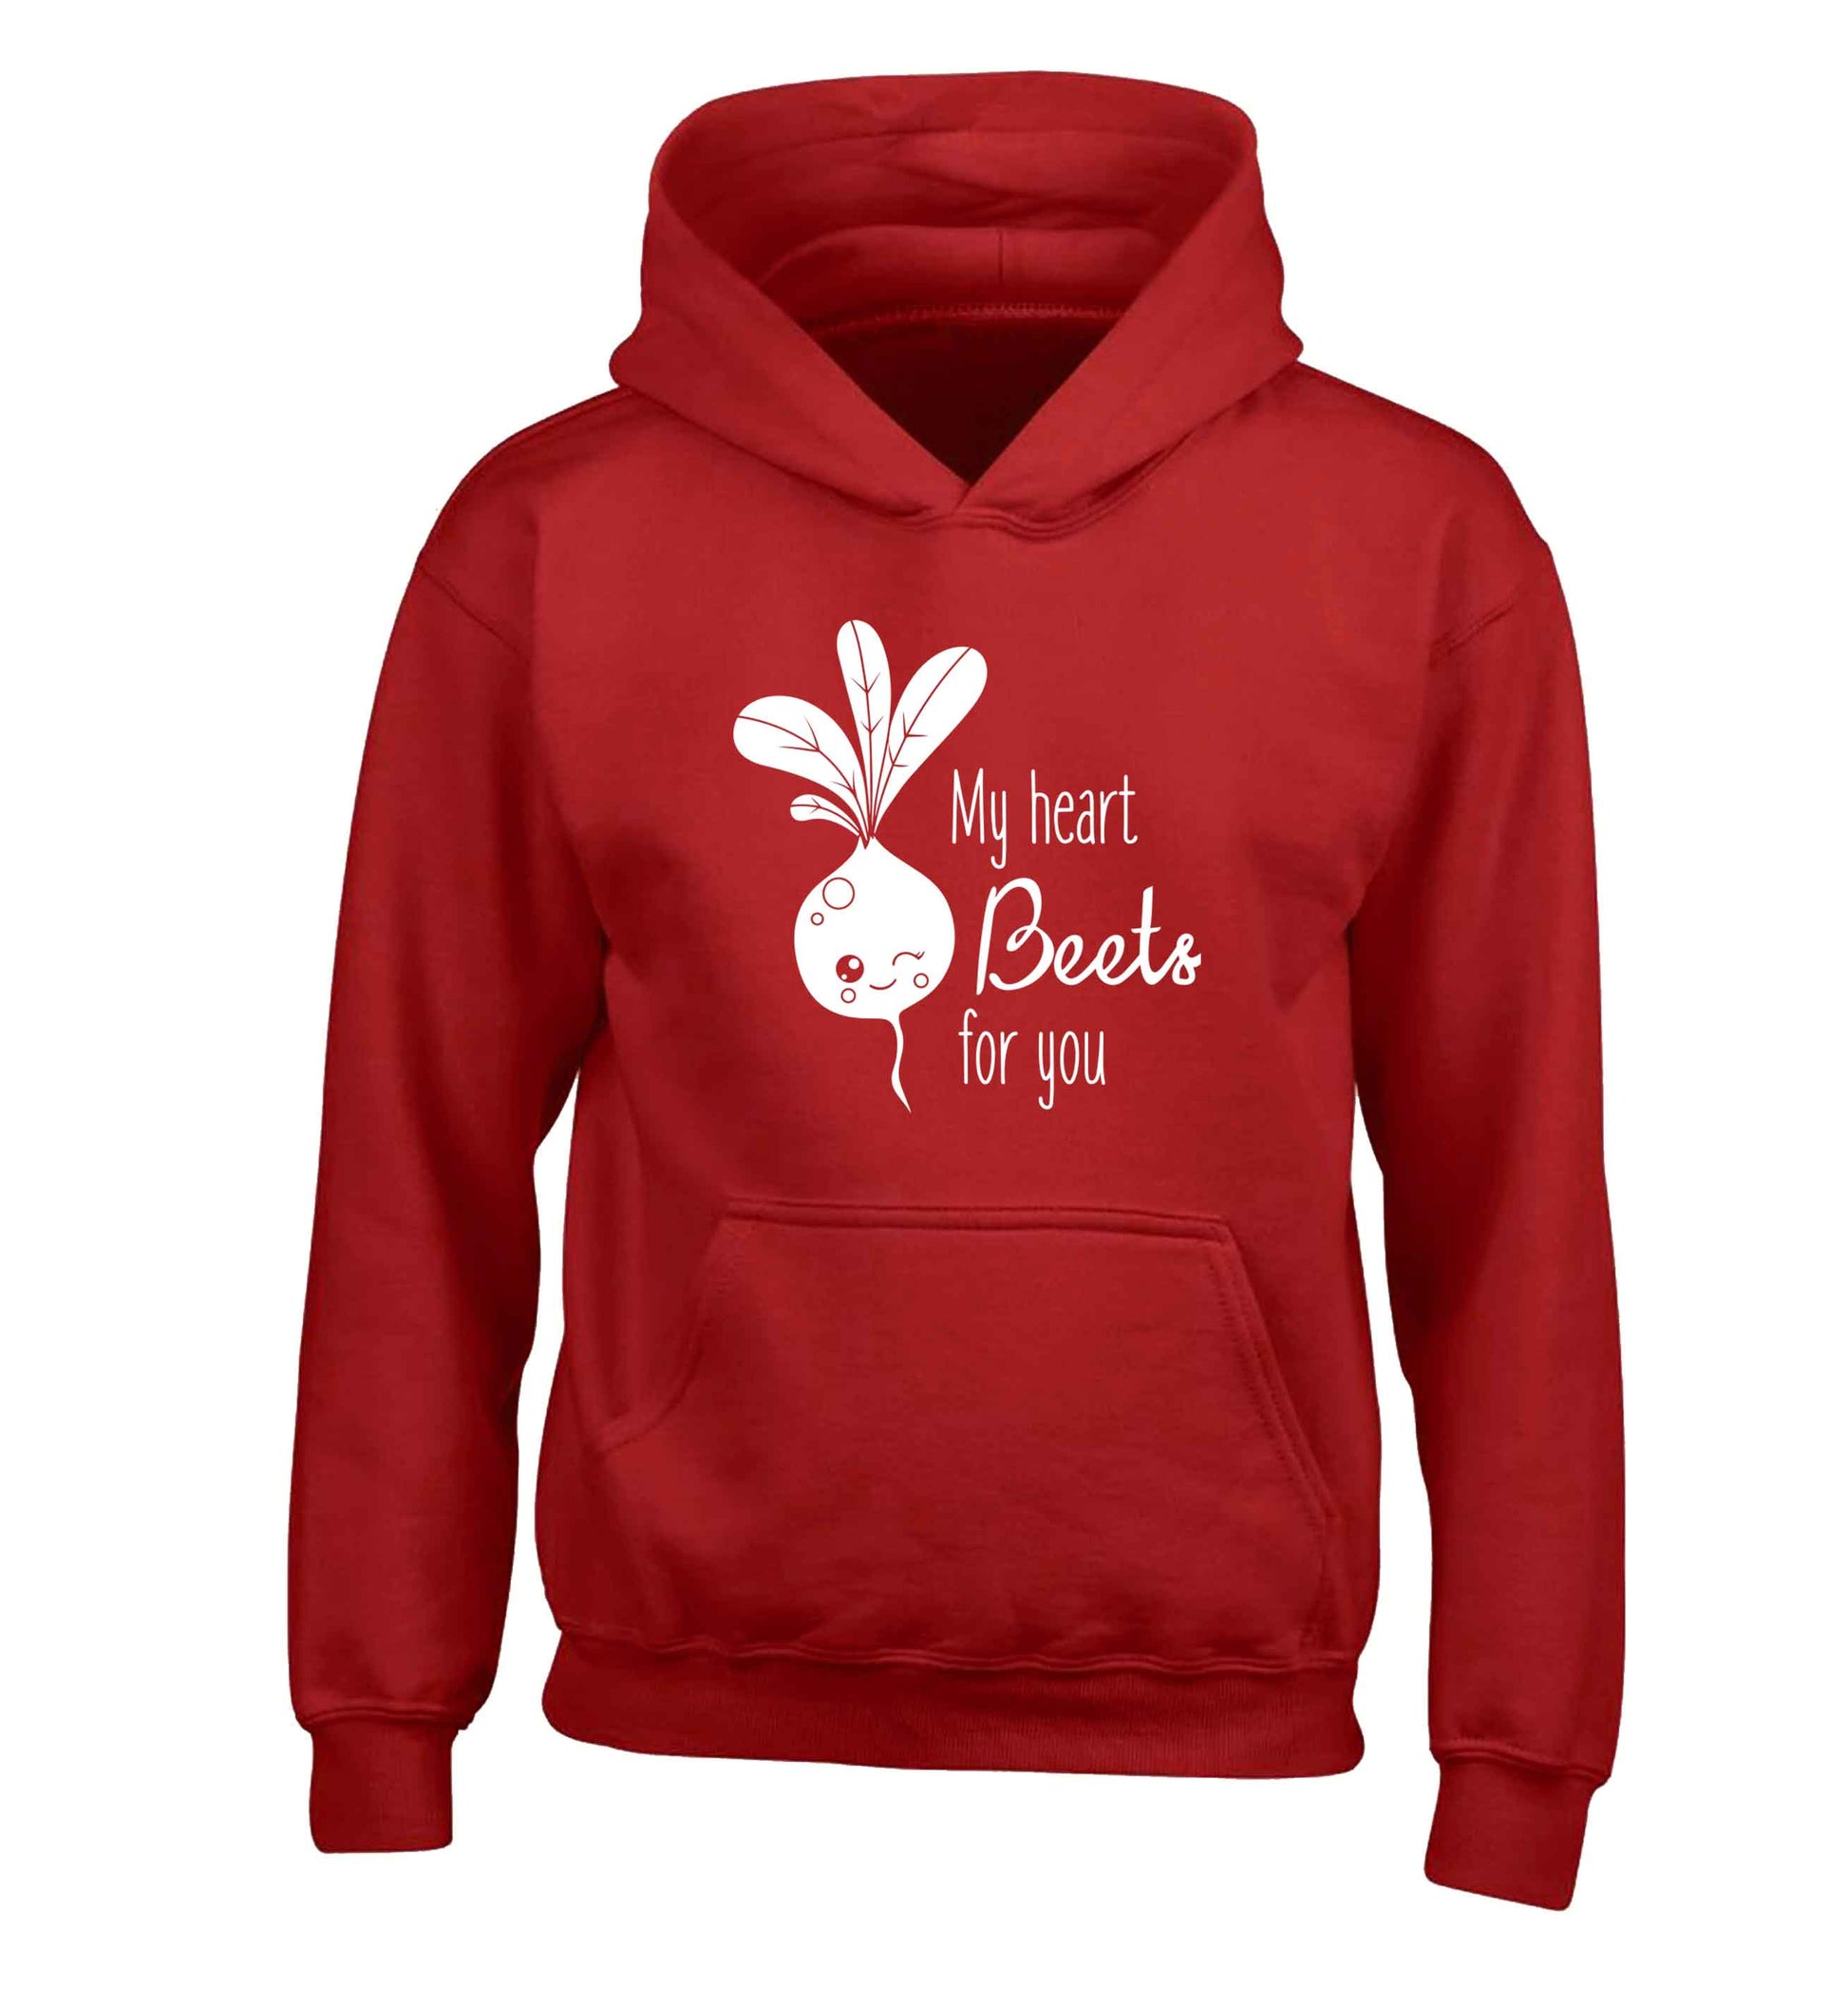 My heart beets for you children's red hoodie 12-13 Years